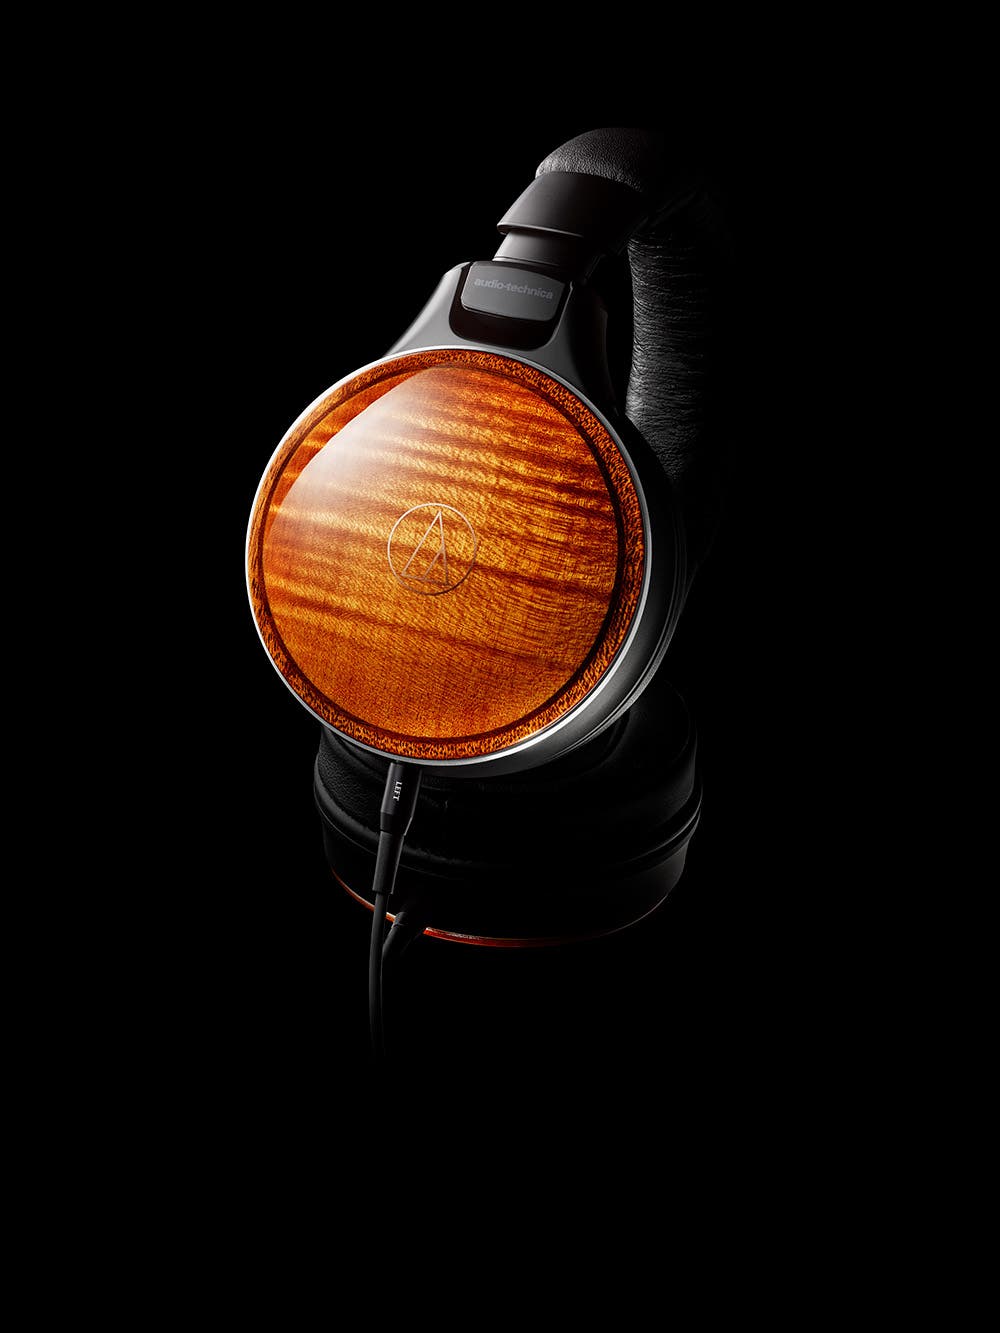 Audio-Technica brings radiant clarity of analogue sound to iconic limited-edition wooden headphones 